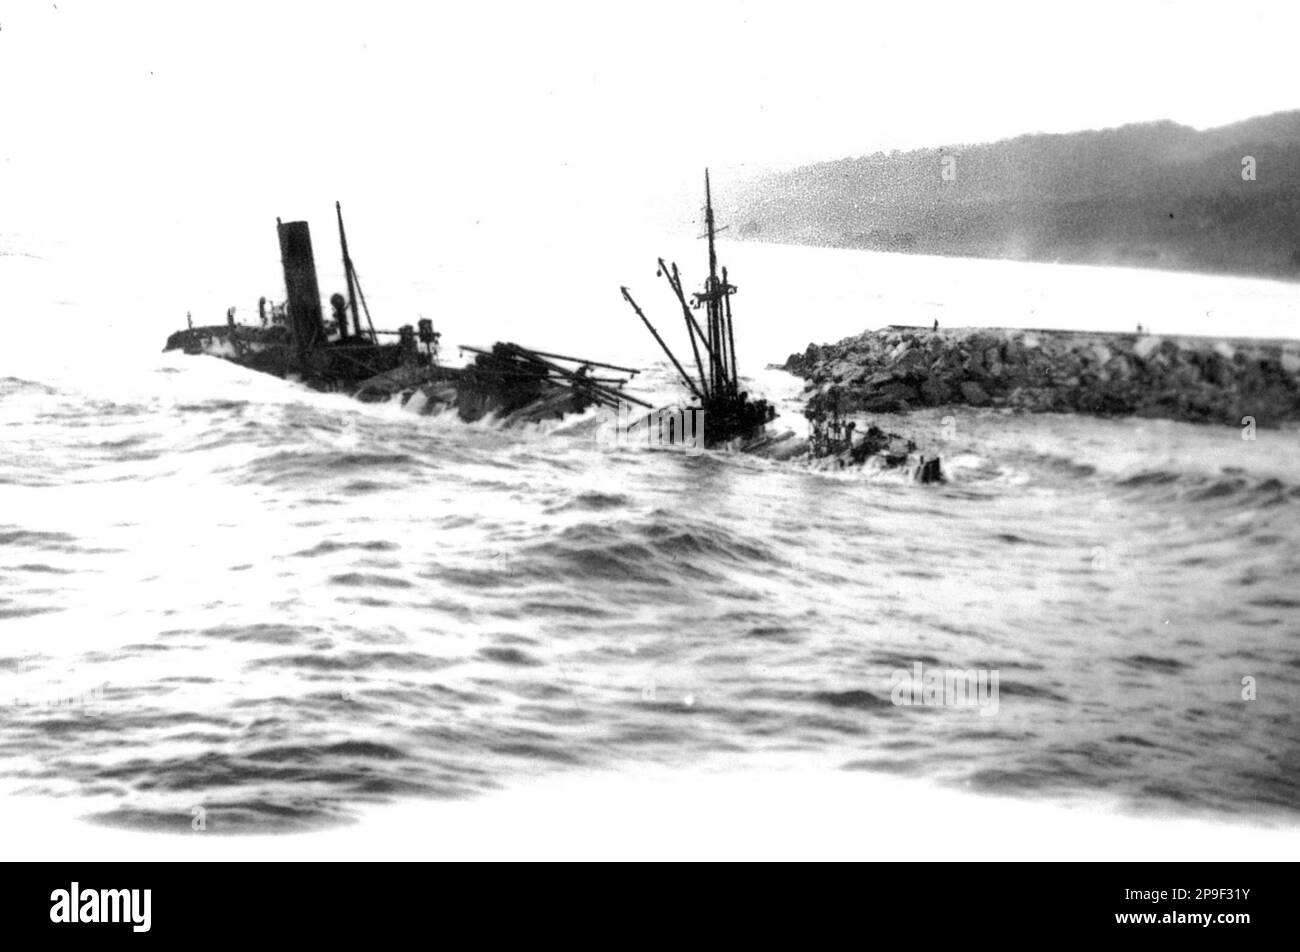 Remains of the Kotuku, which went aground on the North Tiphead as she was leaving Greymouth, Westland, New Zealand, on 16.5.1912, and became a total wreck. The steel screw steamship weighed 1054 tons gross and had a net register of 662 tons. Stock Photo